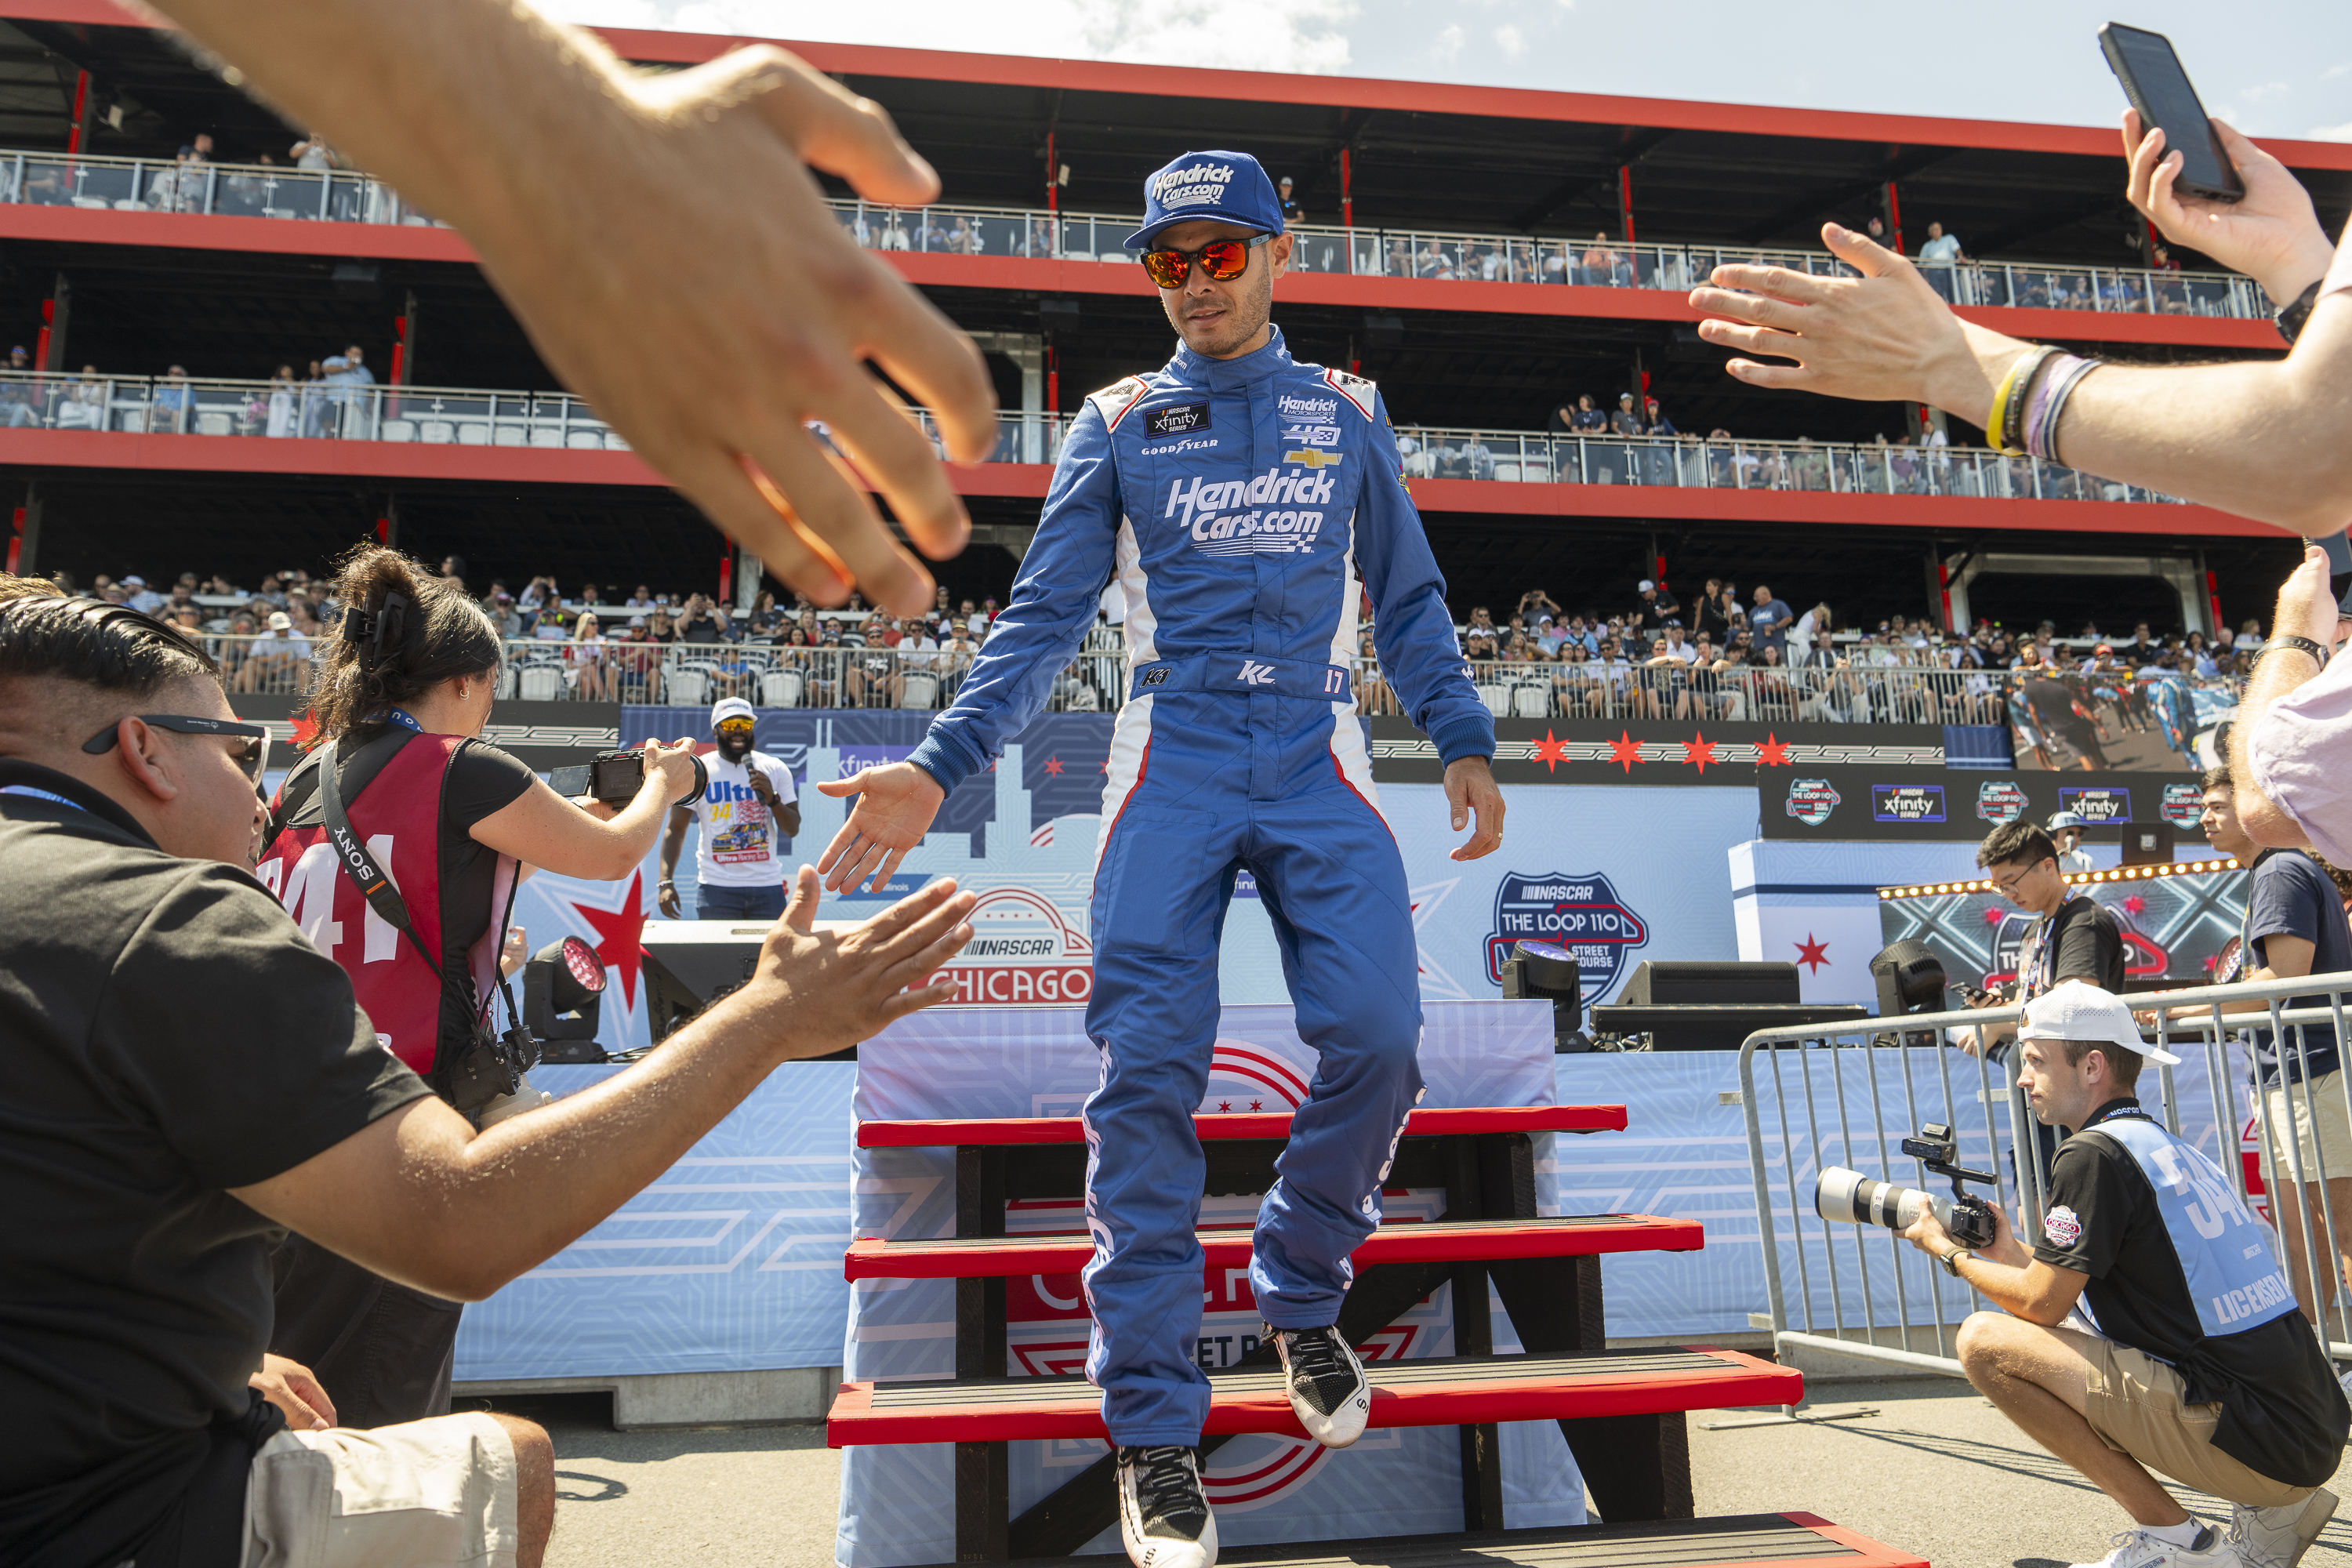 Kyle Larson (17) greets fans during the fan introduction before a NASCAR Xfinity Series street course auto race in Grant Park, Saturday, July 6, 202 4 in Chicago. (Tyler Pasciak LaRiviere/Chicago Sun-Times via AP)